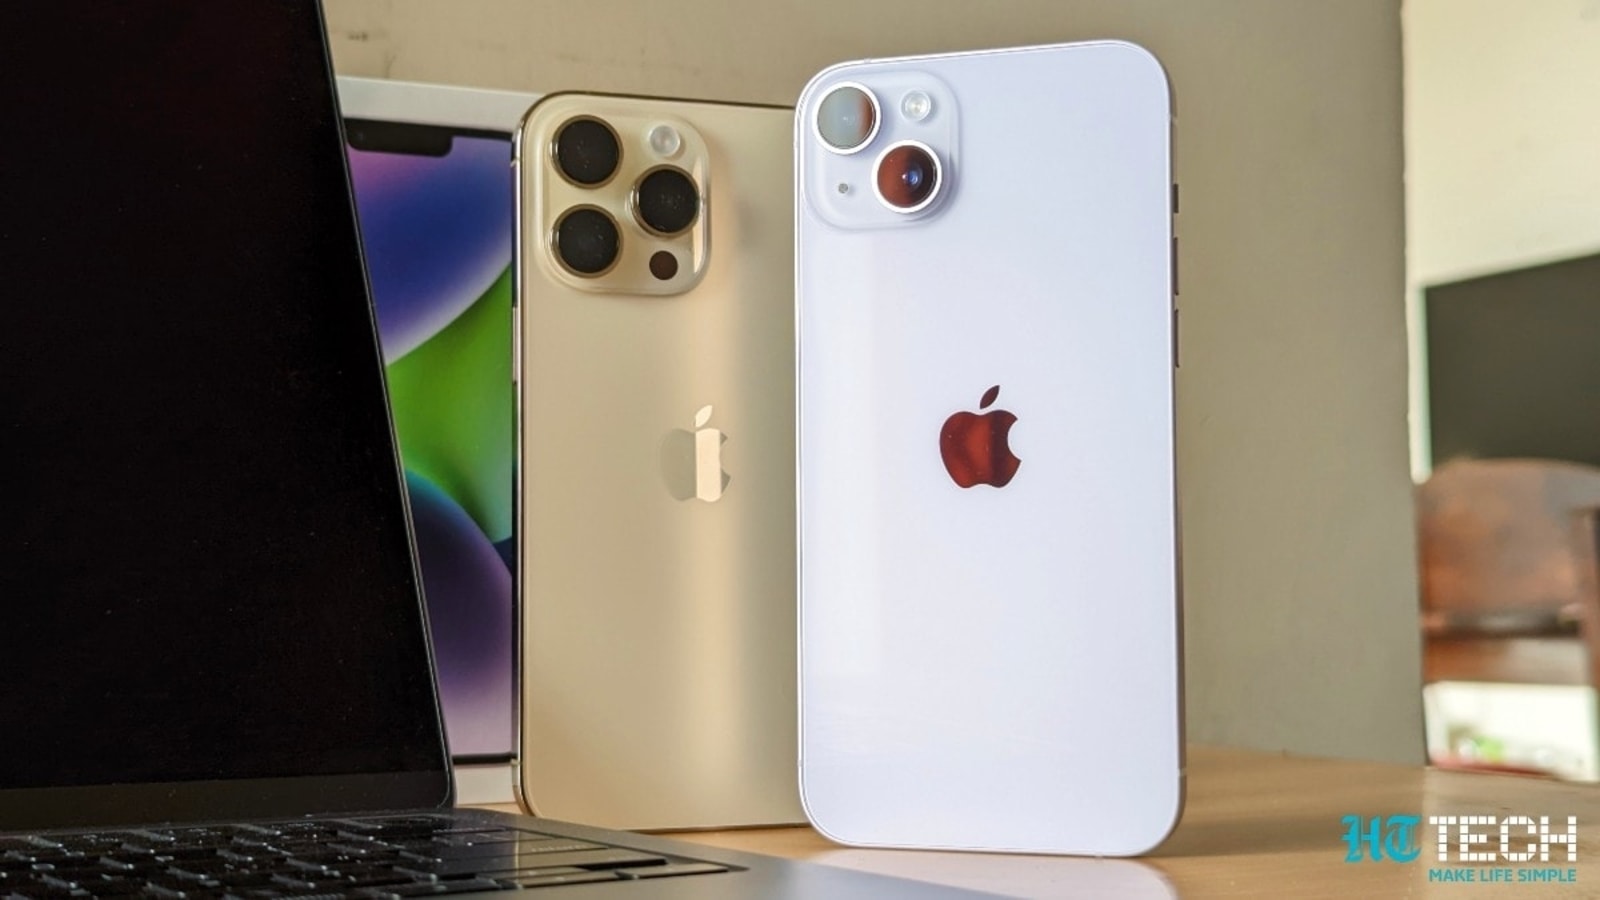 iPhone 14 Pro and Pro Max reportedly beat the 14 and 14 Plus to